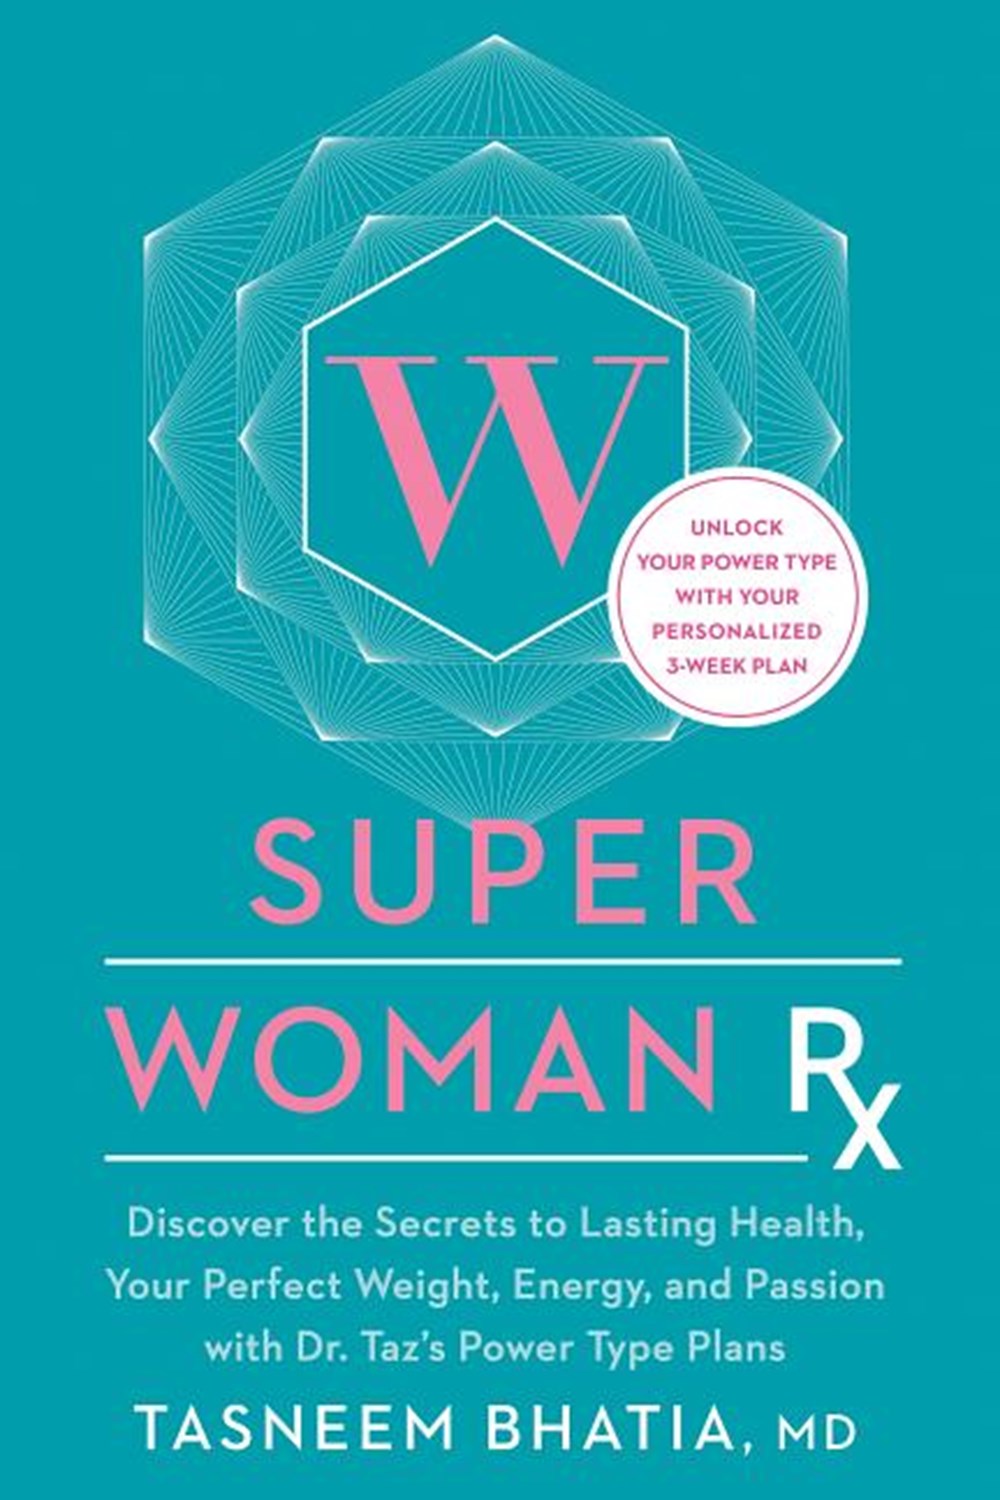 Super Woman RX: Unlock the Secrets to Lasting Health, Your Perfect Weight, Energy, and Passion with 